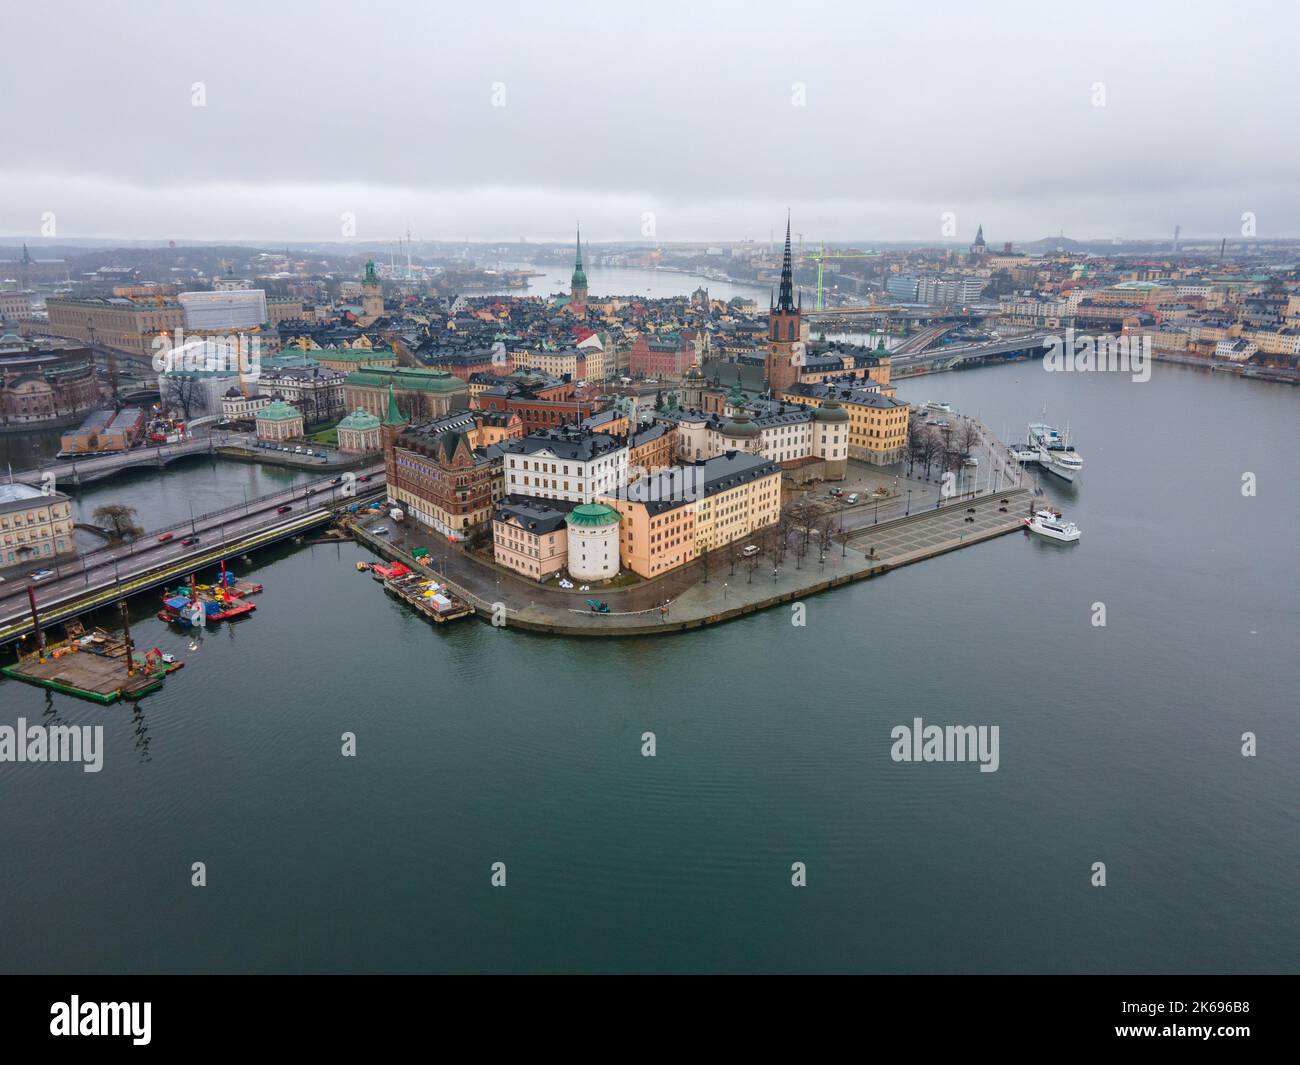 Stockholm,  Sweden - 30 12 2020: Areal view of the City Hall (Rådhuset), an example of national romanticism in architecture. Daylight. Stock Photo